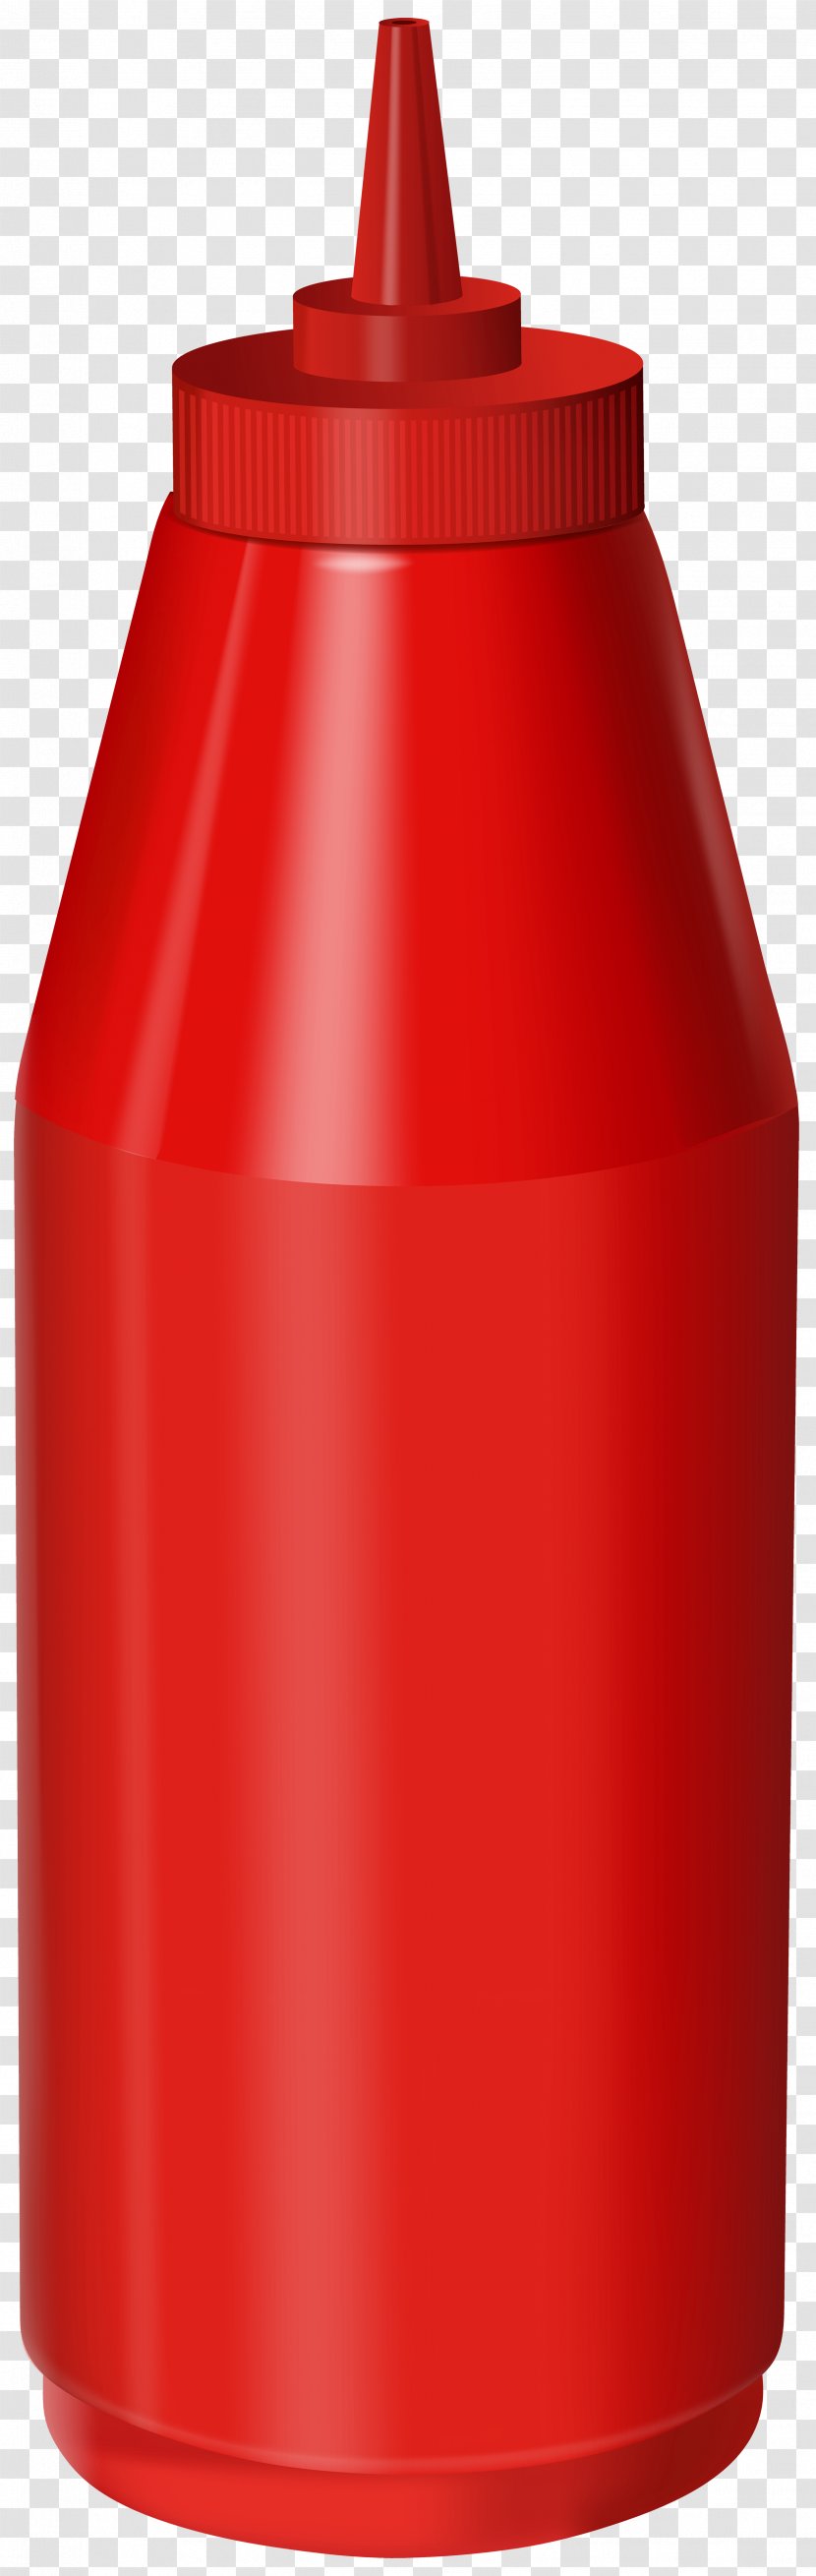 Ketchup H. J. Heinz Company Clip Art - Barbecue Sauce - Image Transparent PNG